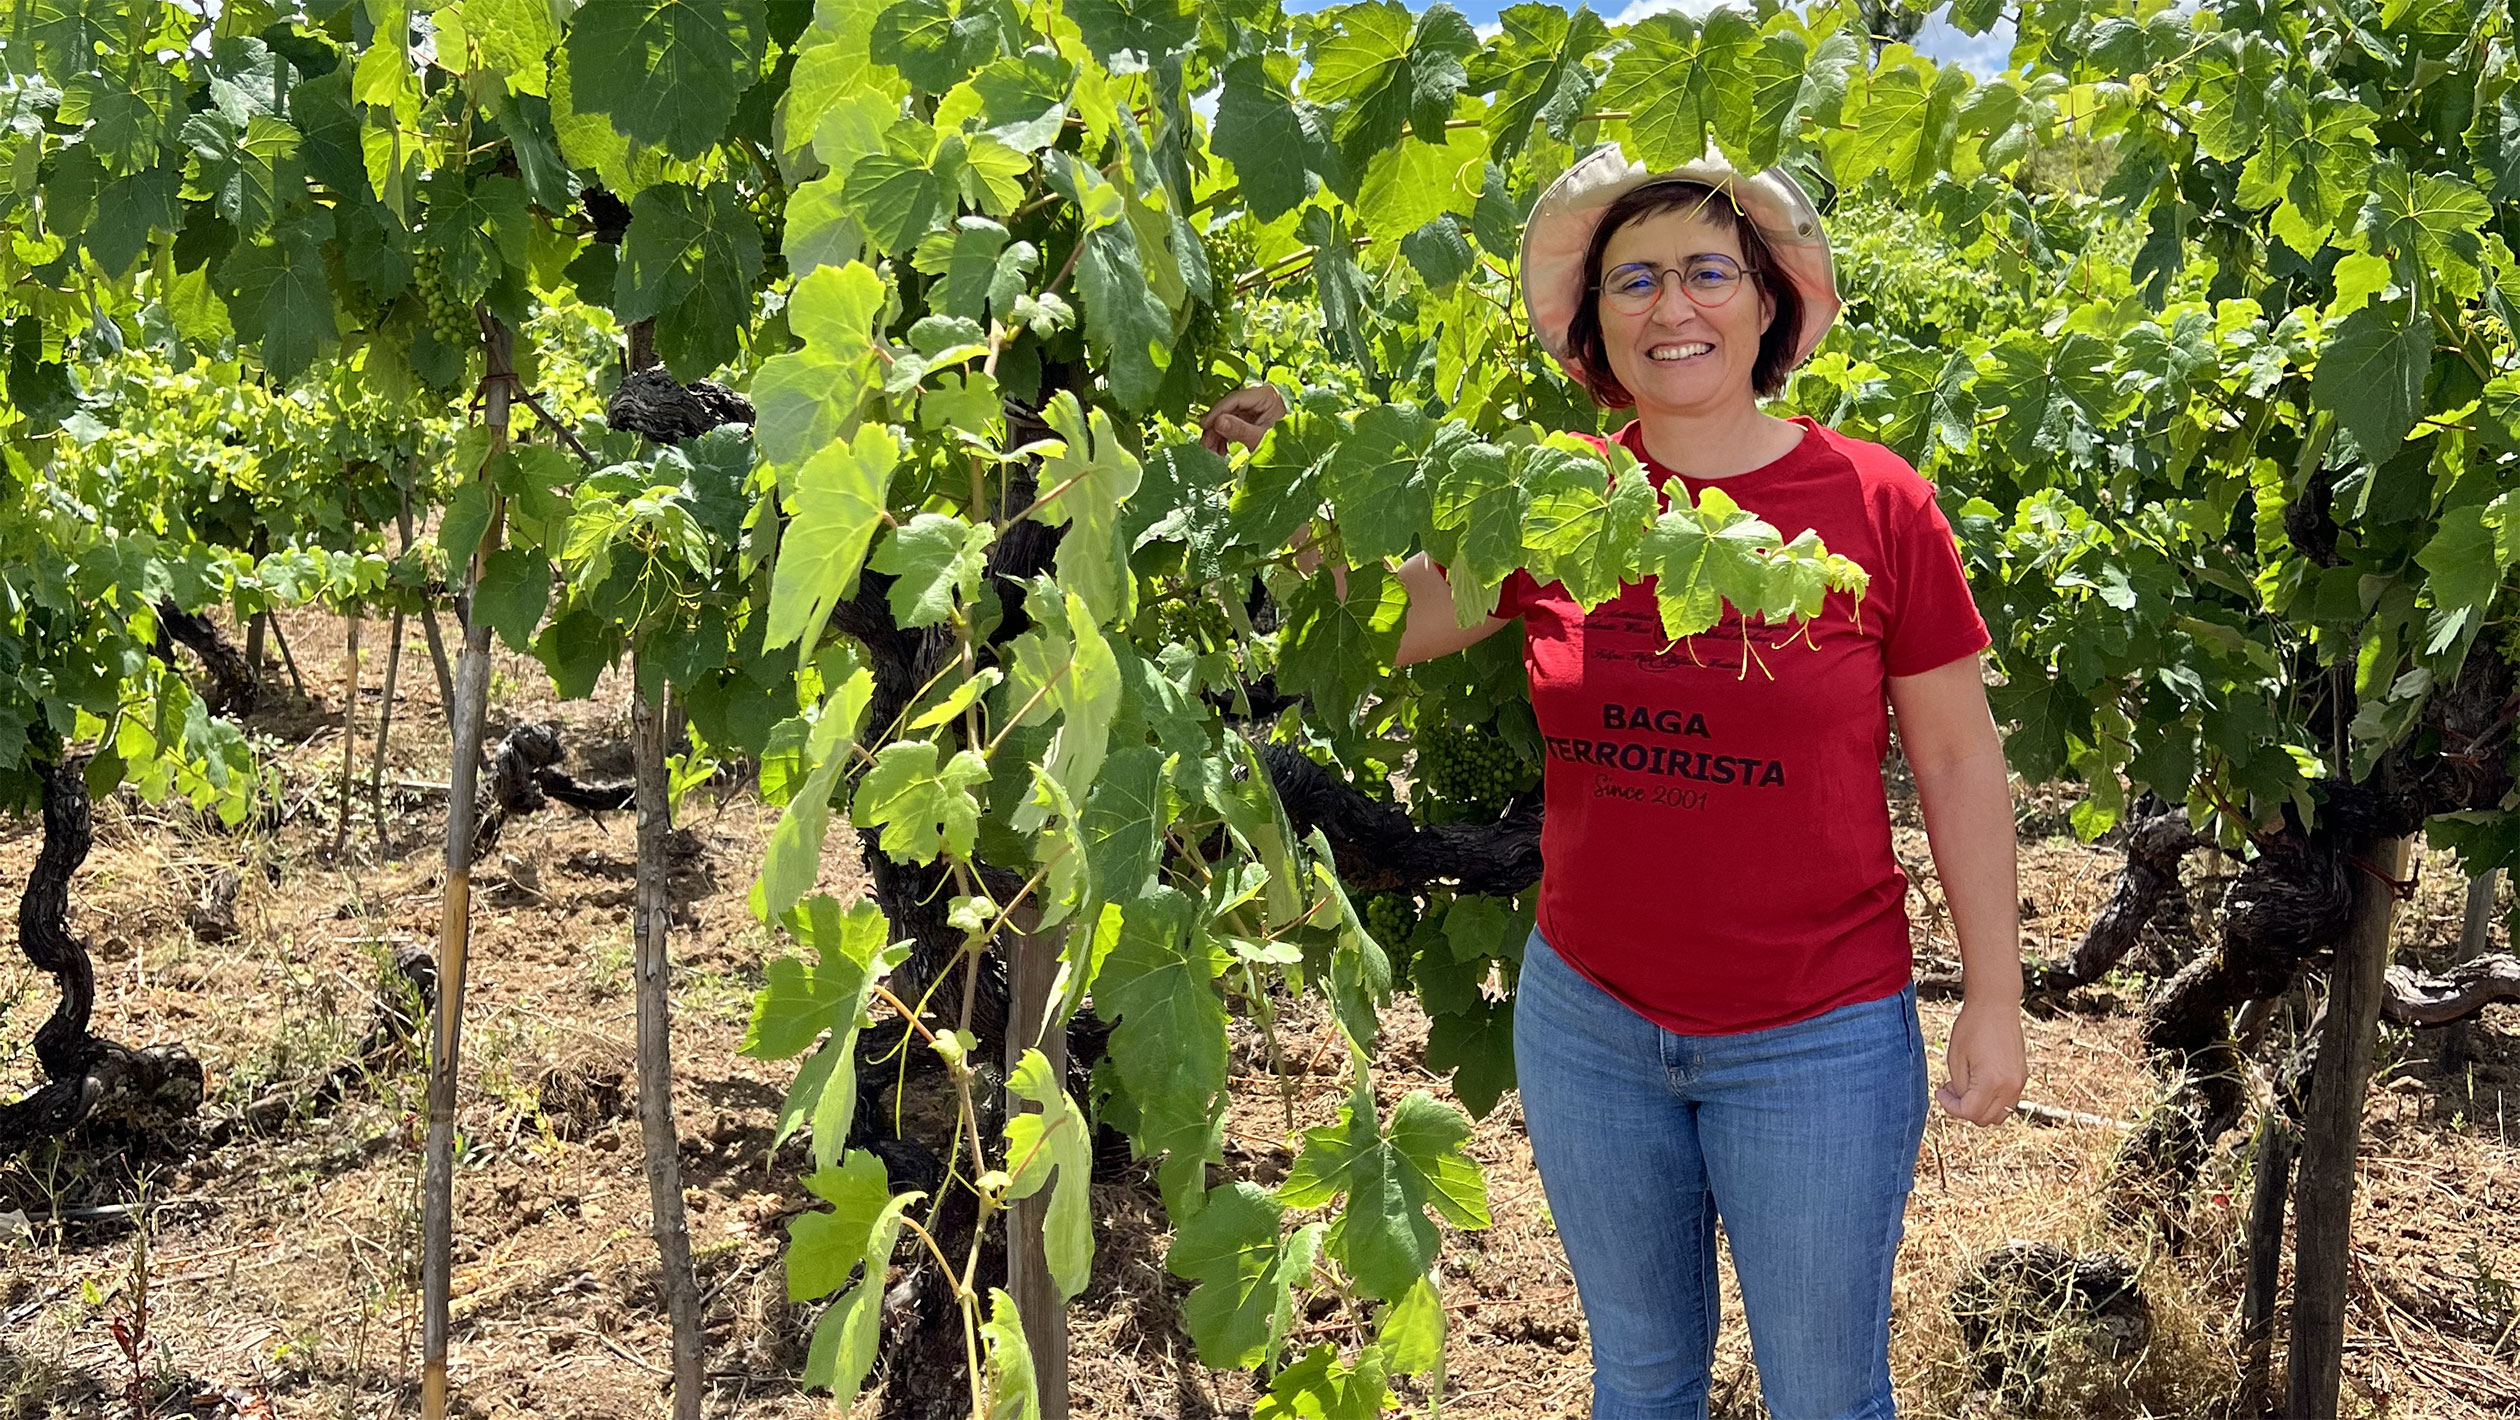 Headshot of Filipa Pato who poses amongst the grapes in a vineyard.